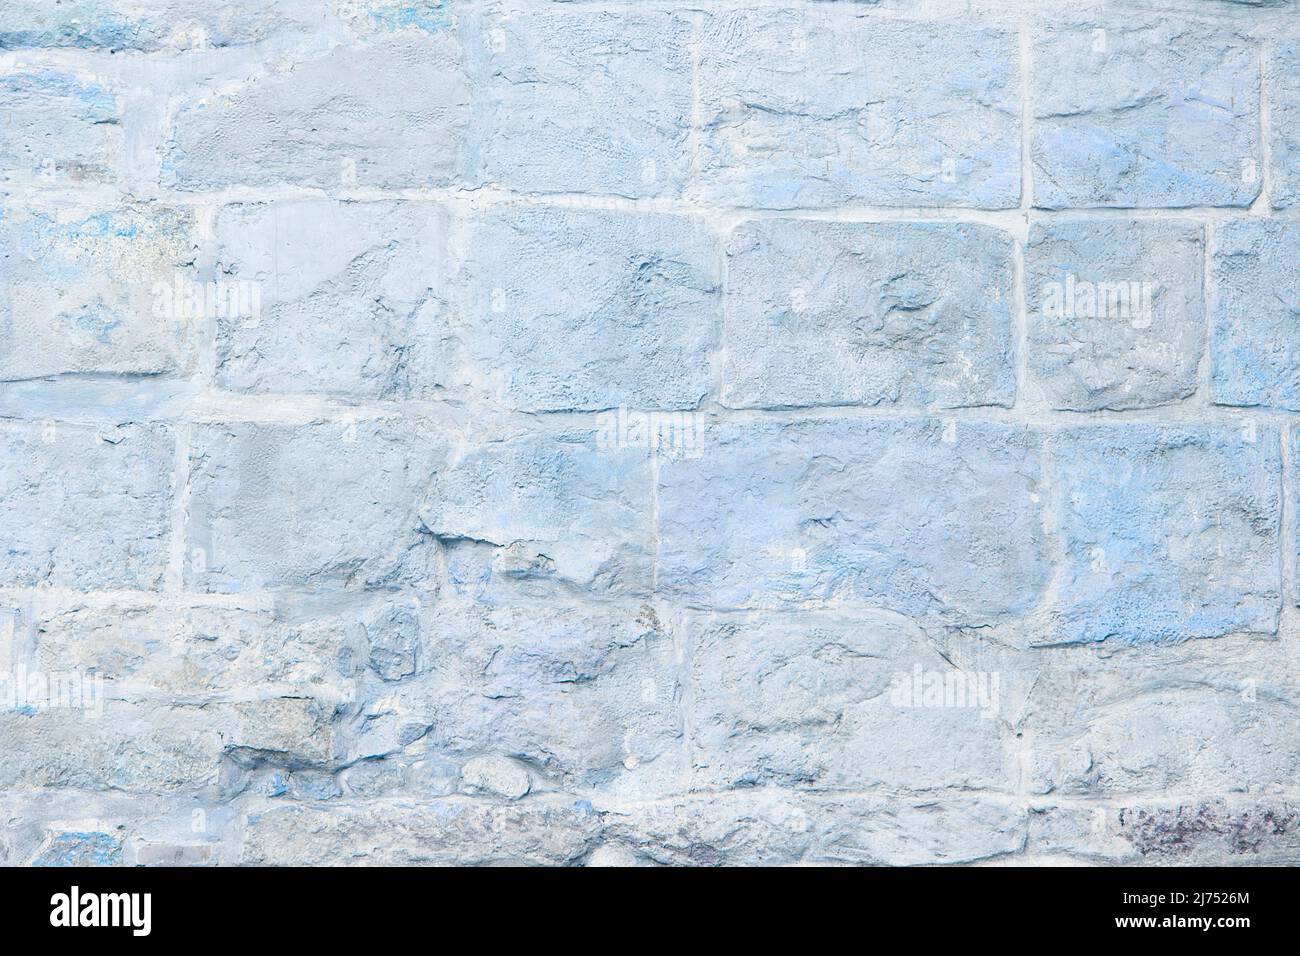 Wall with white bricks. Old brick wall background. grunge brick background texture. blue hues Stock Photo